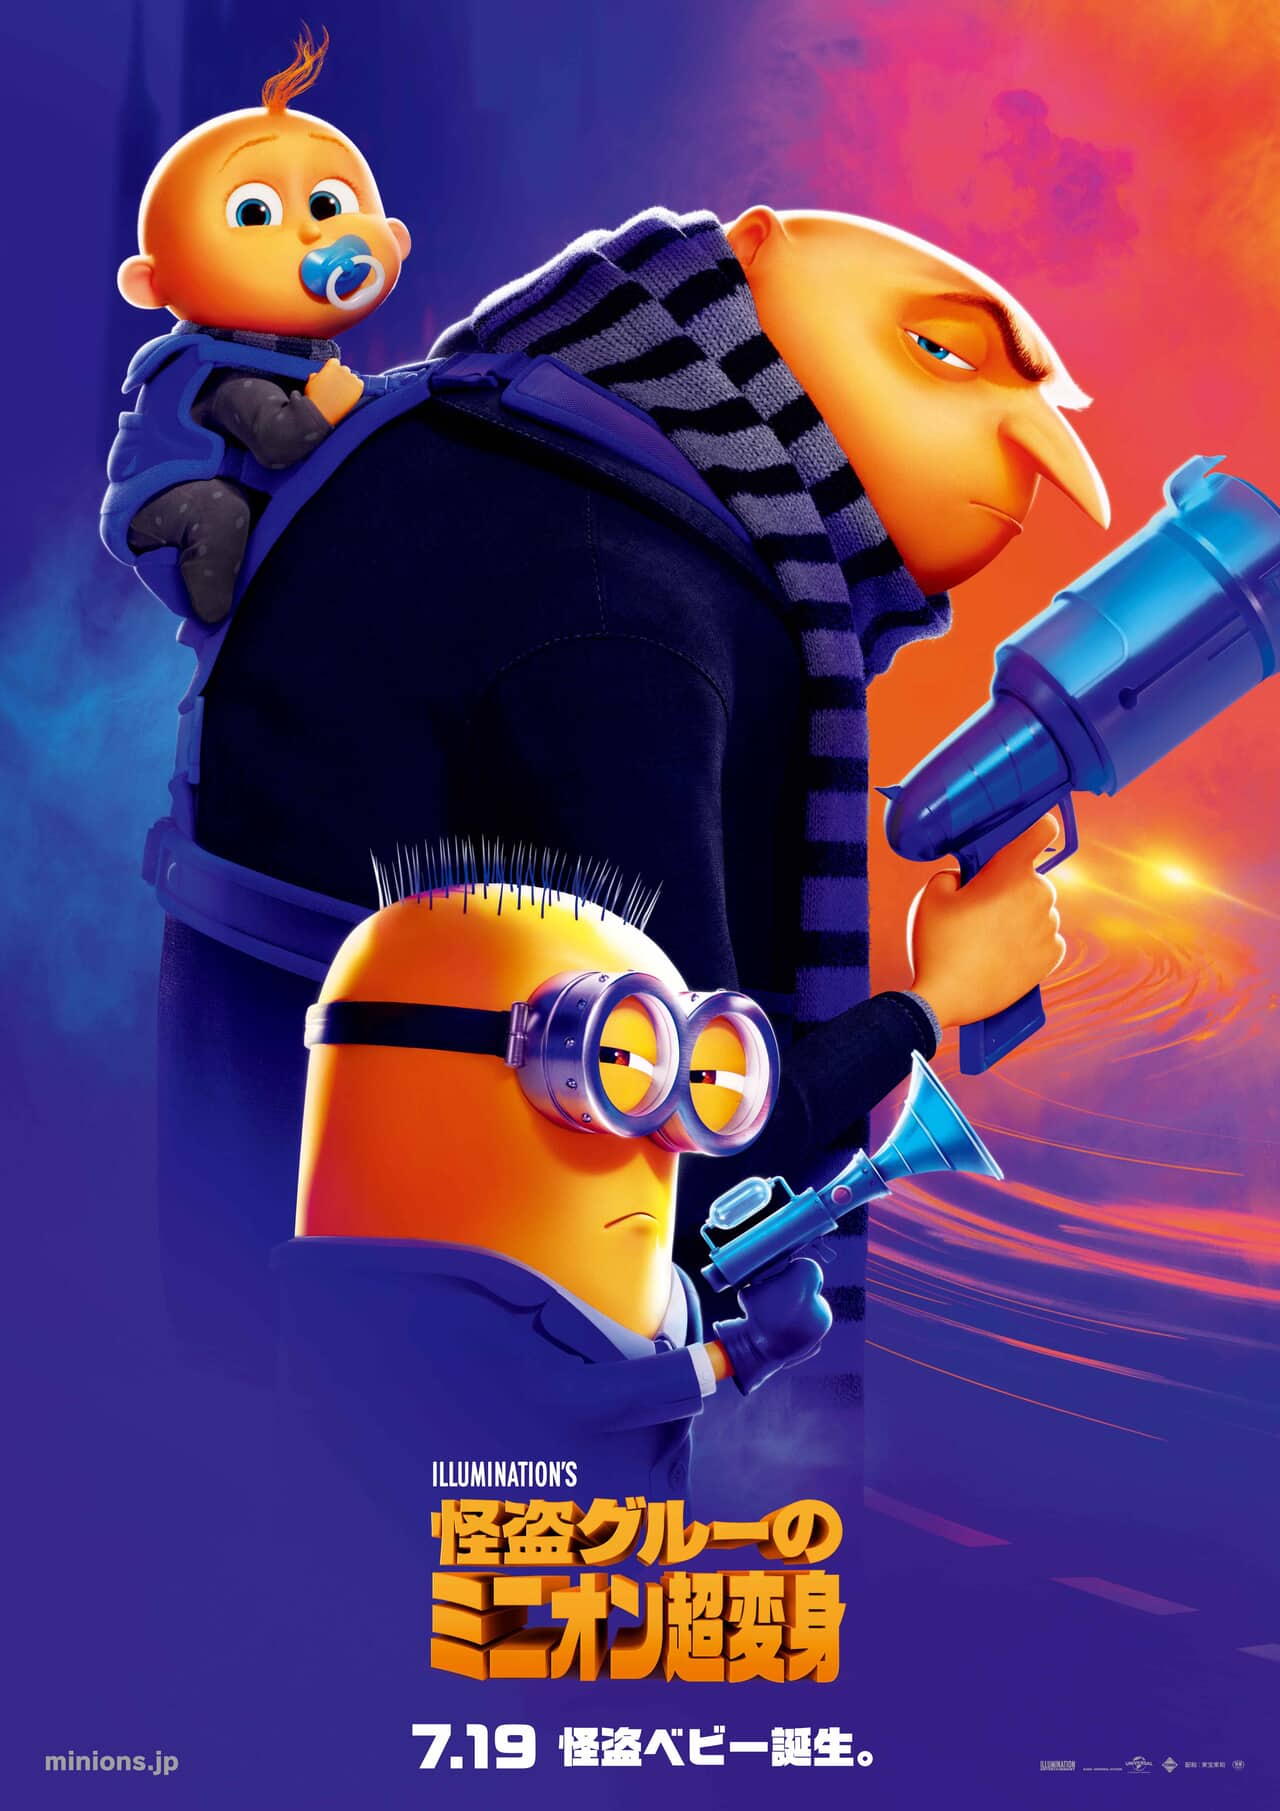 © Illumination Entertainment and Universal Studios. All Rights Reserved.